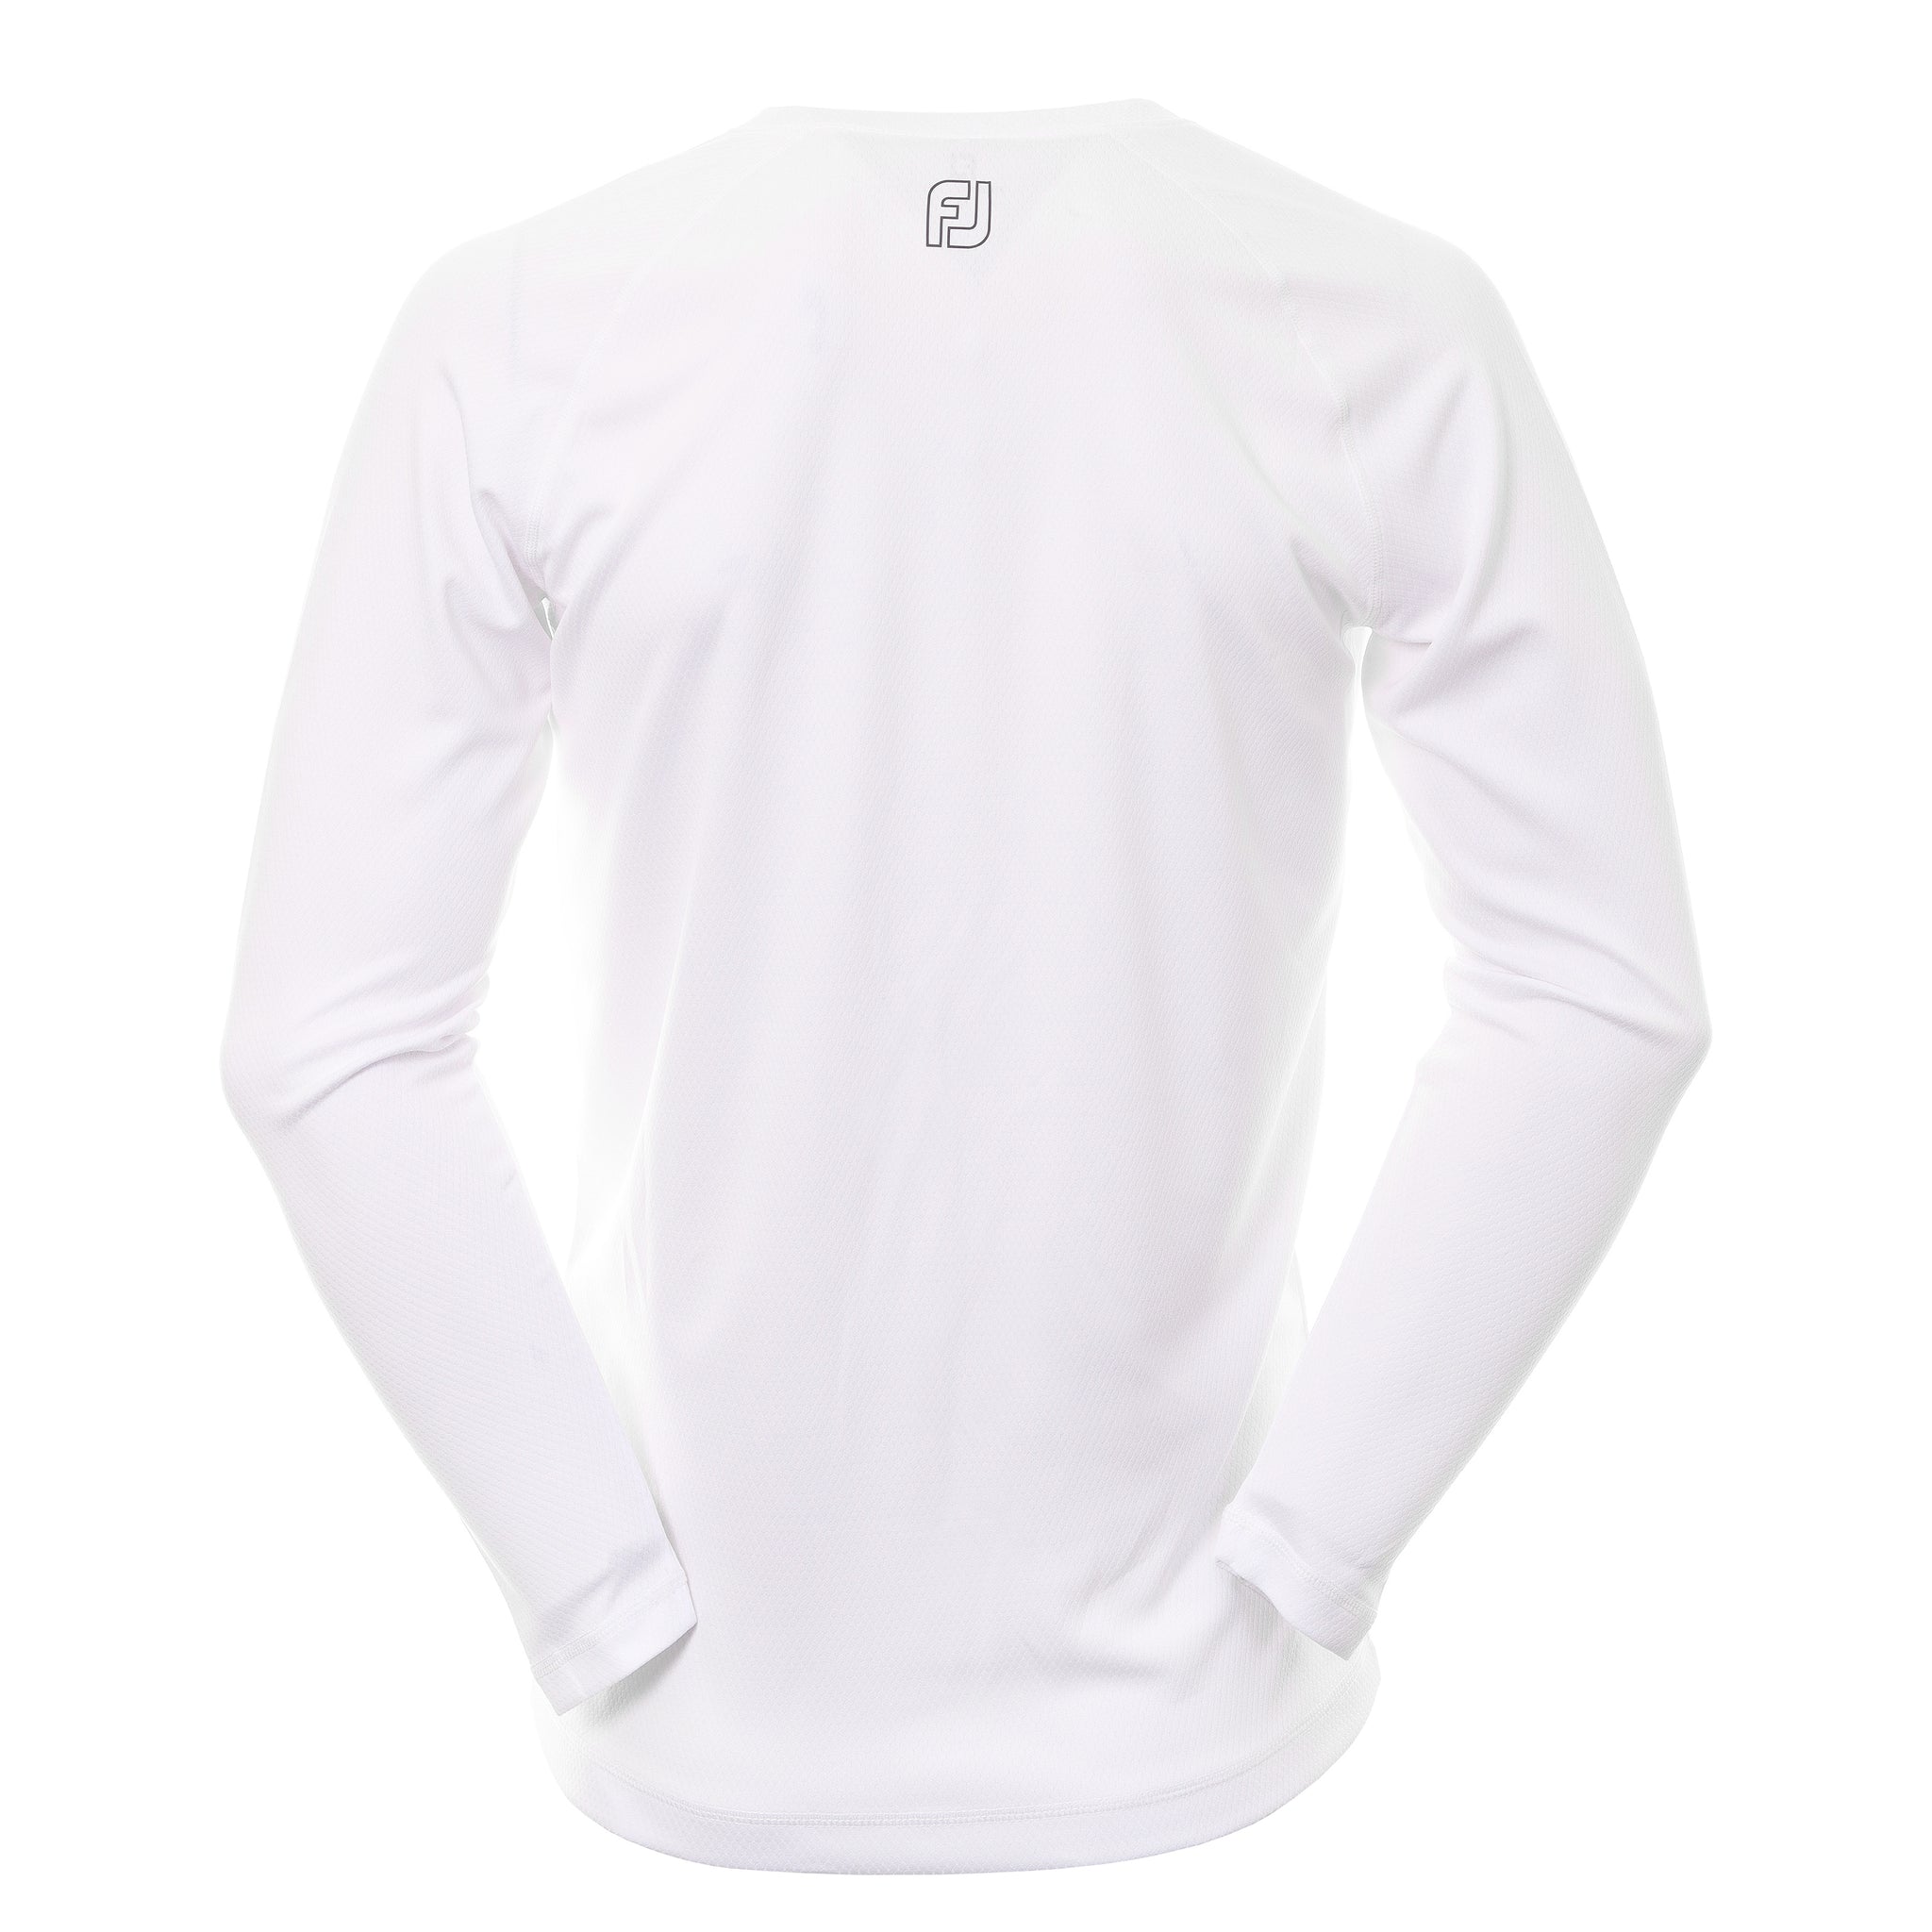 FootJoy ThermoSeries Baselayer 88816 White | Function18